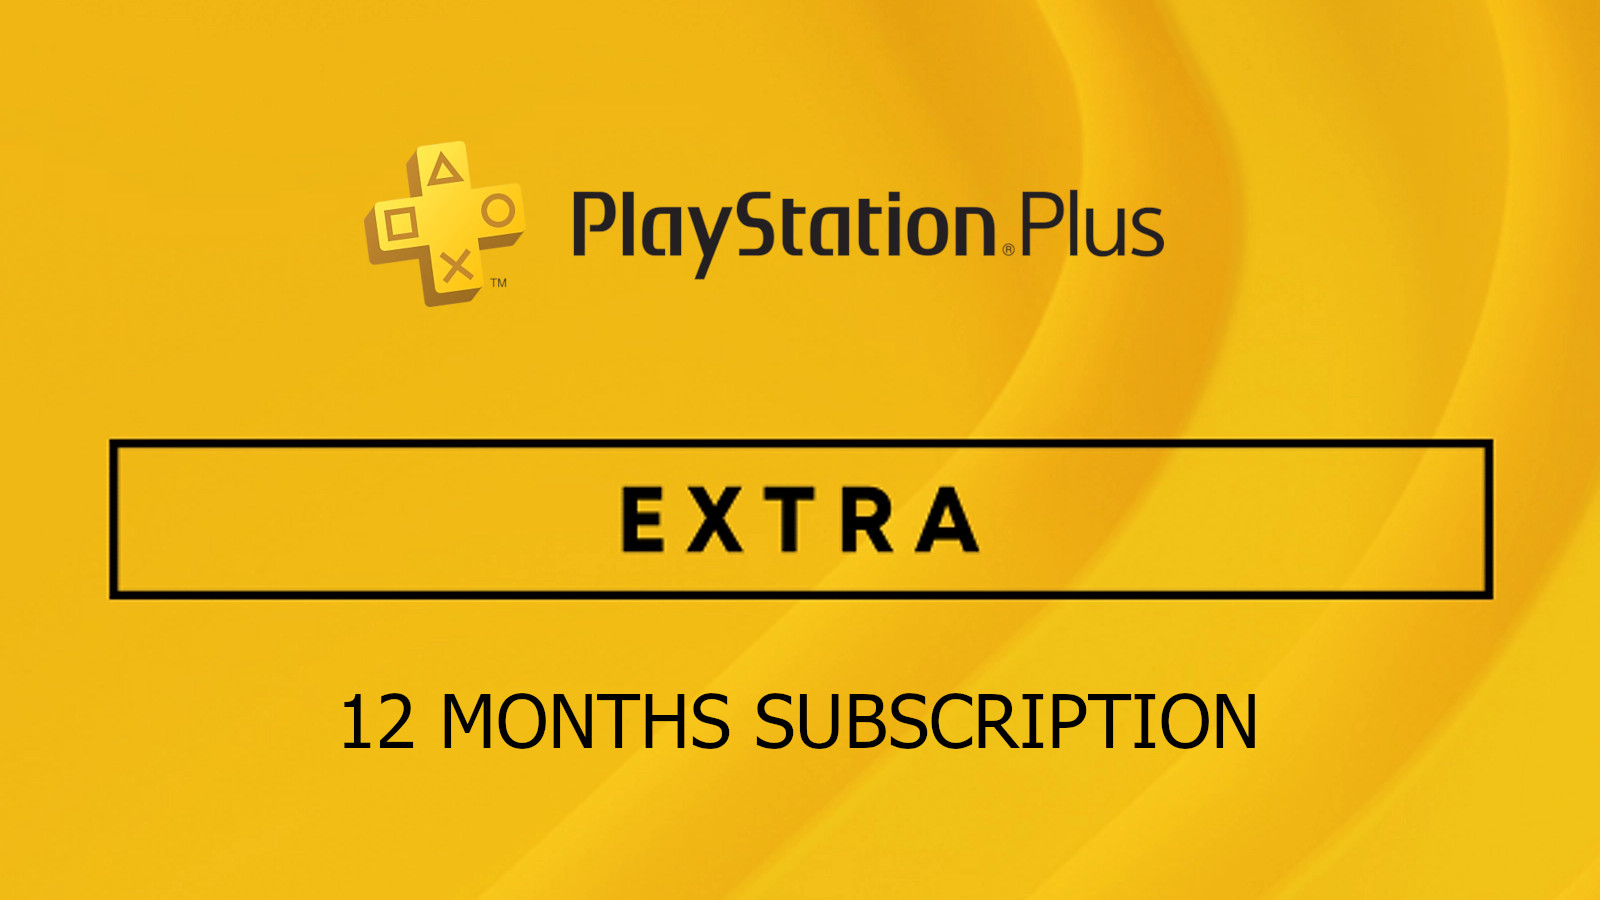 PlayStation Plus Extra 12 Months Subscription ACCOUNT, 94.23$